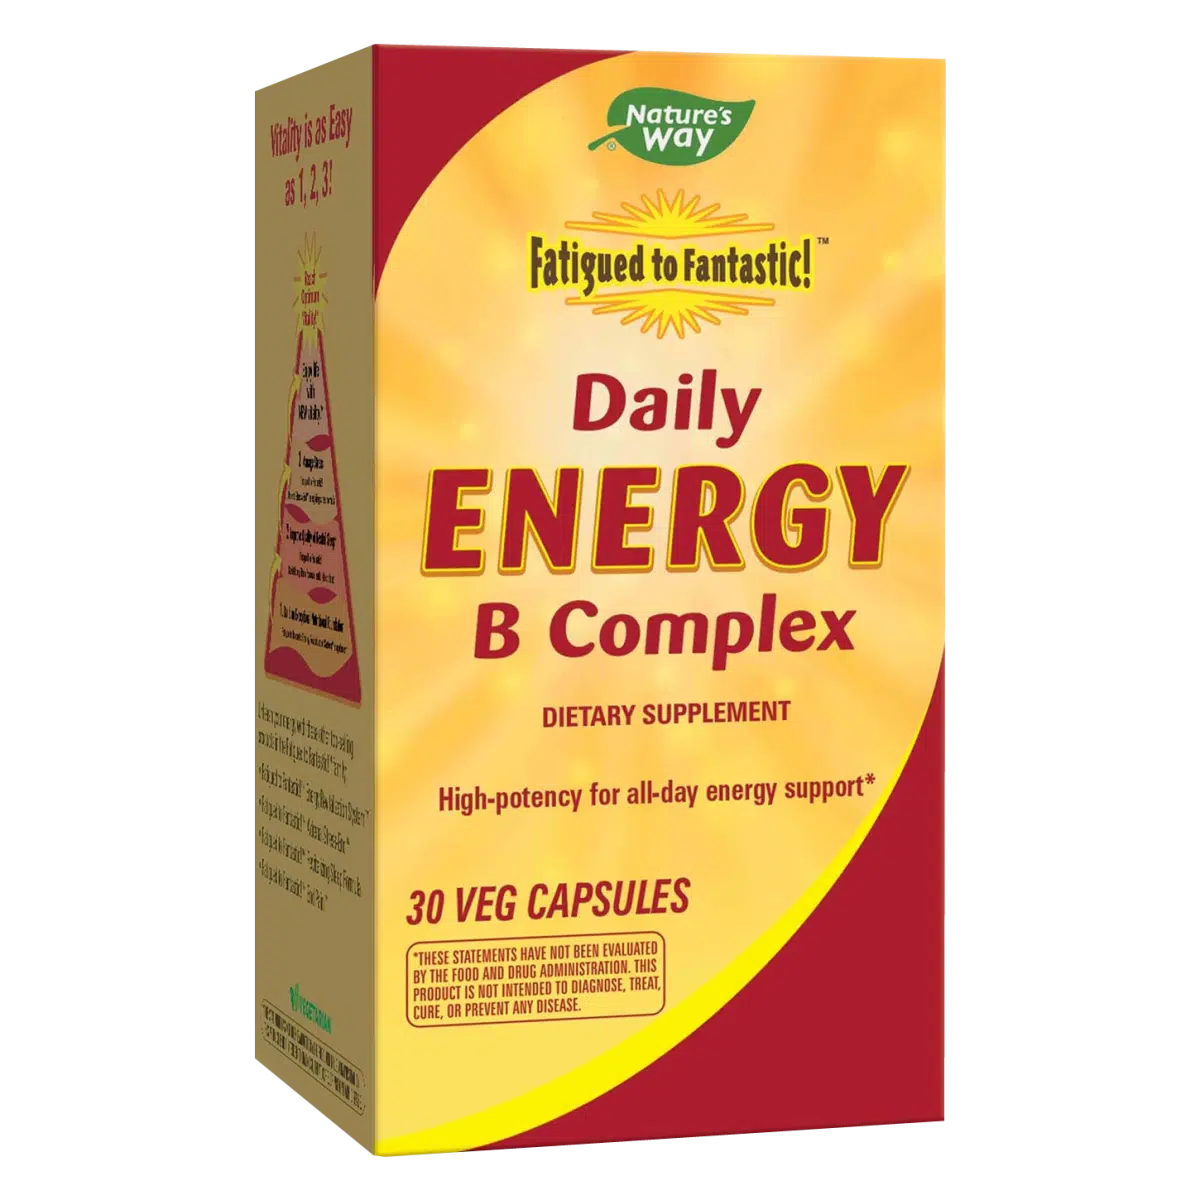 Daily Energy B Complex